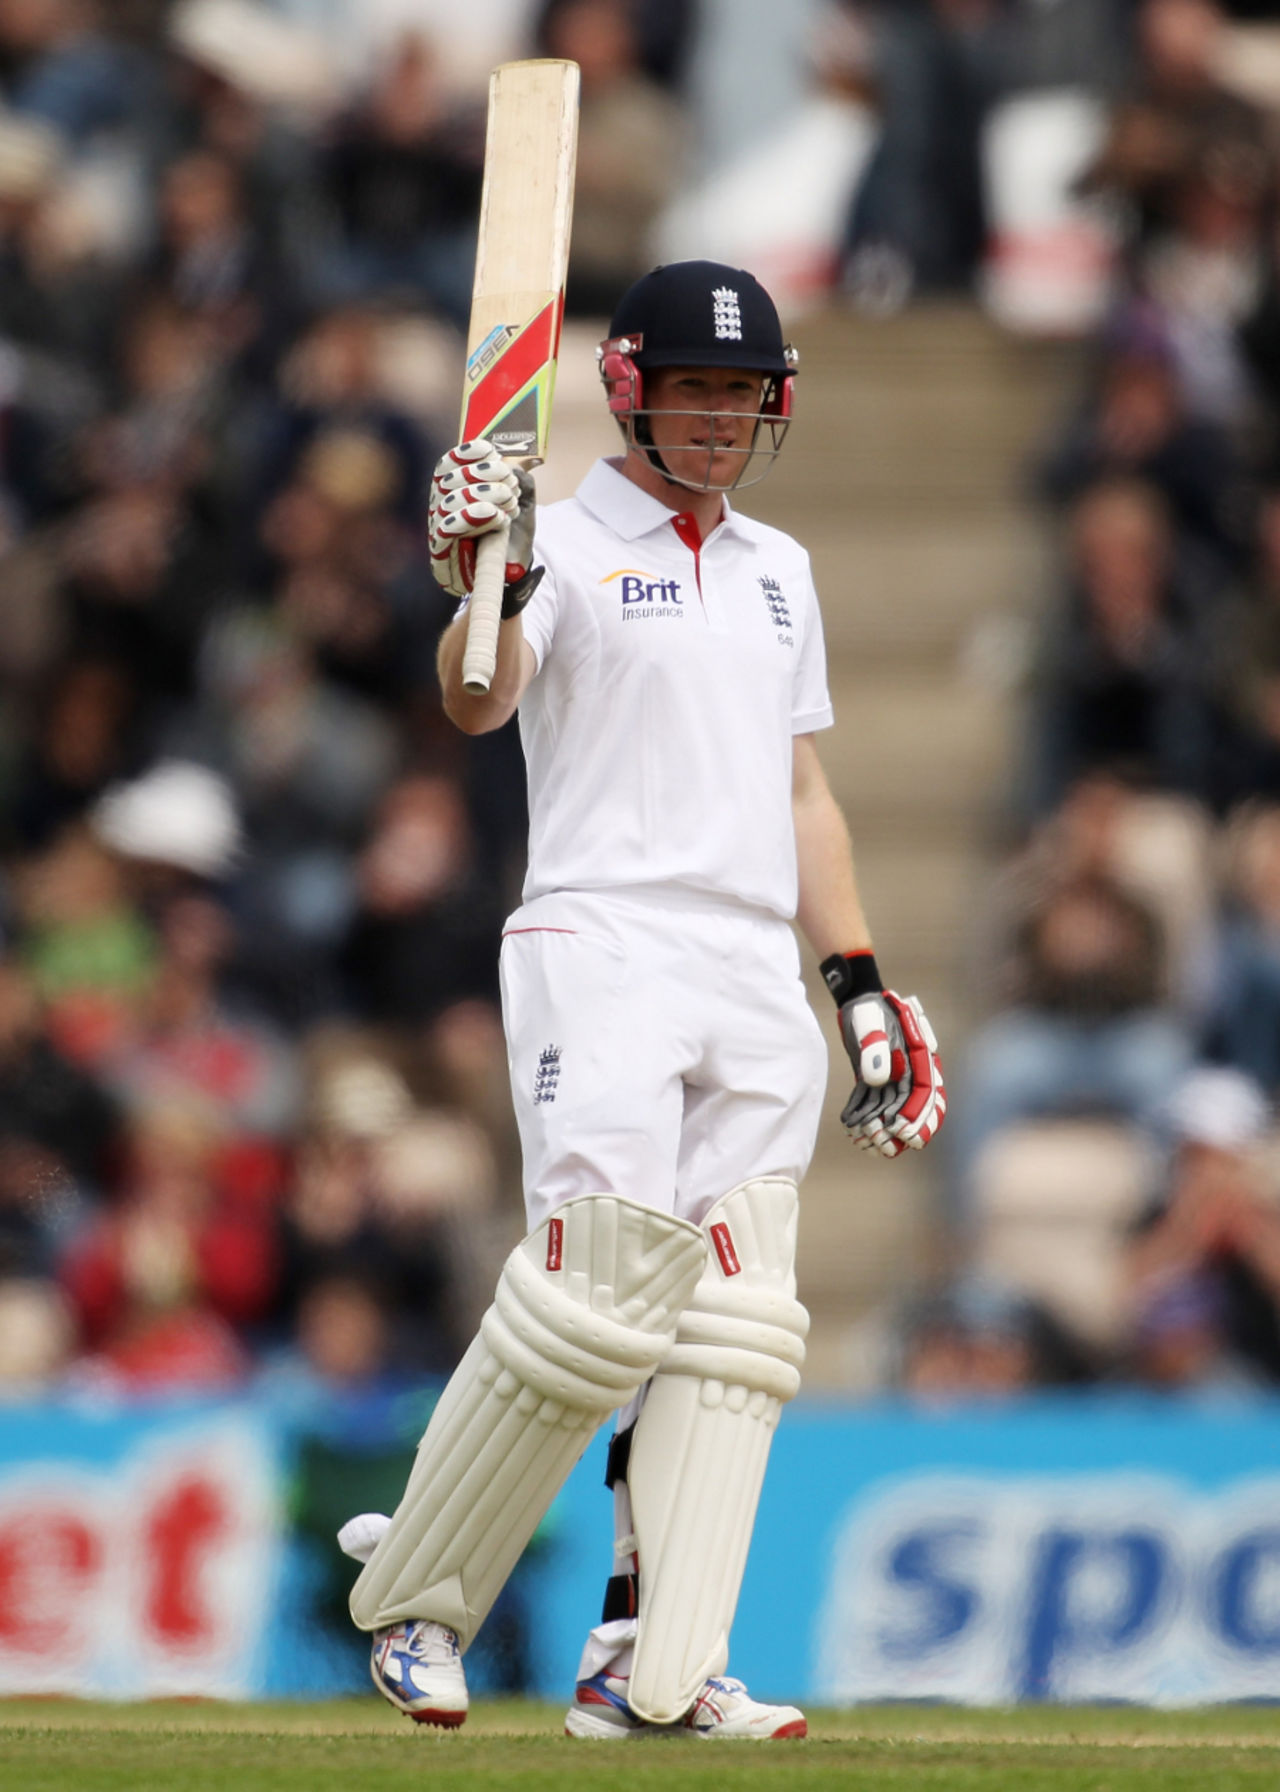 Eoin Morgan acknowledges applause for his second Test fifty, England v Sri Lanka, 3rd Test, Rose Bowl, June 19, 2011